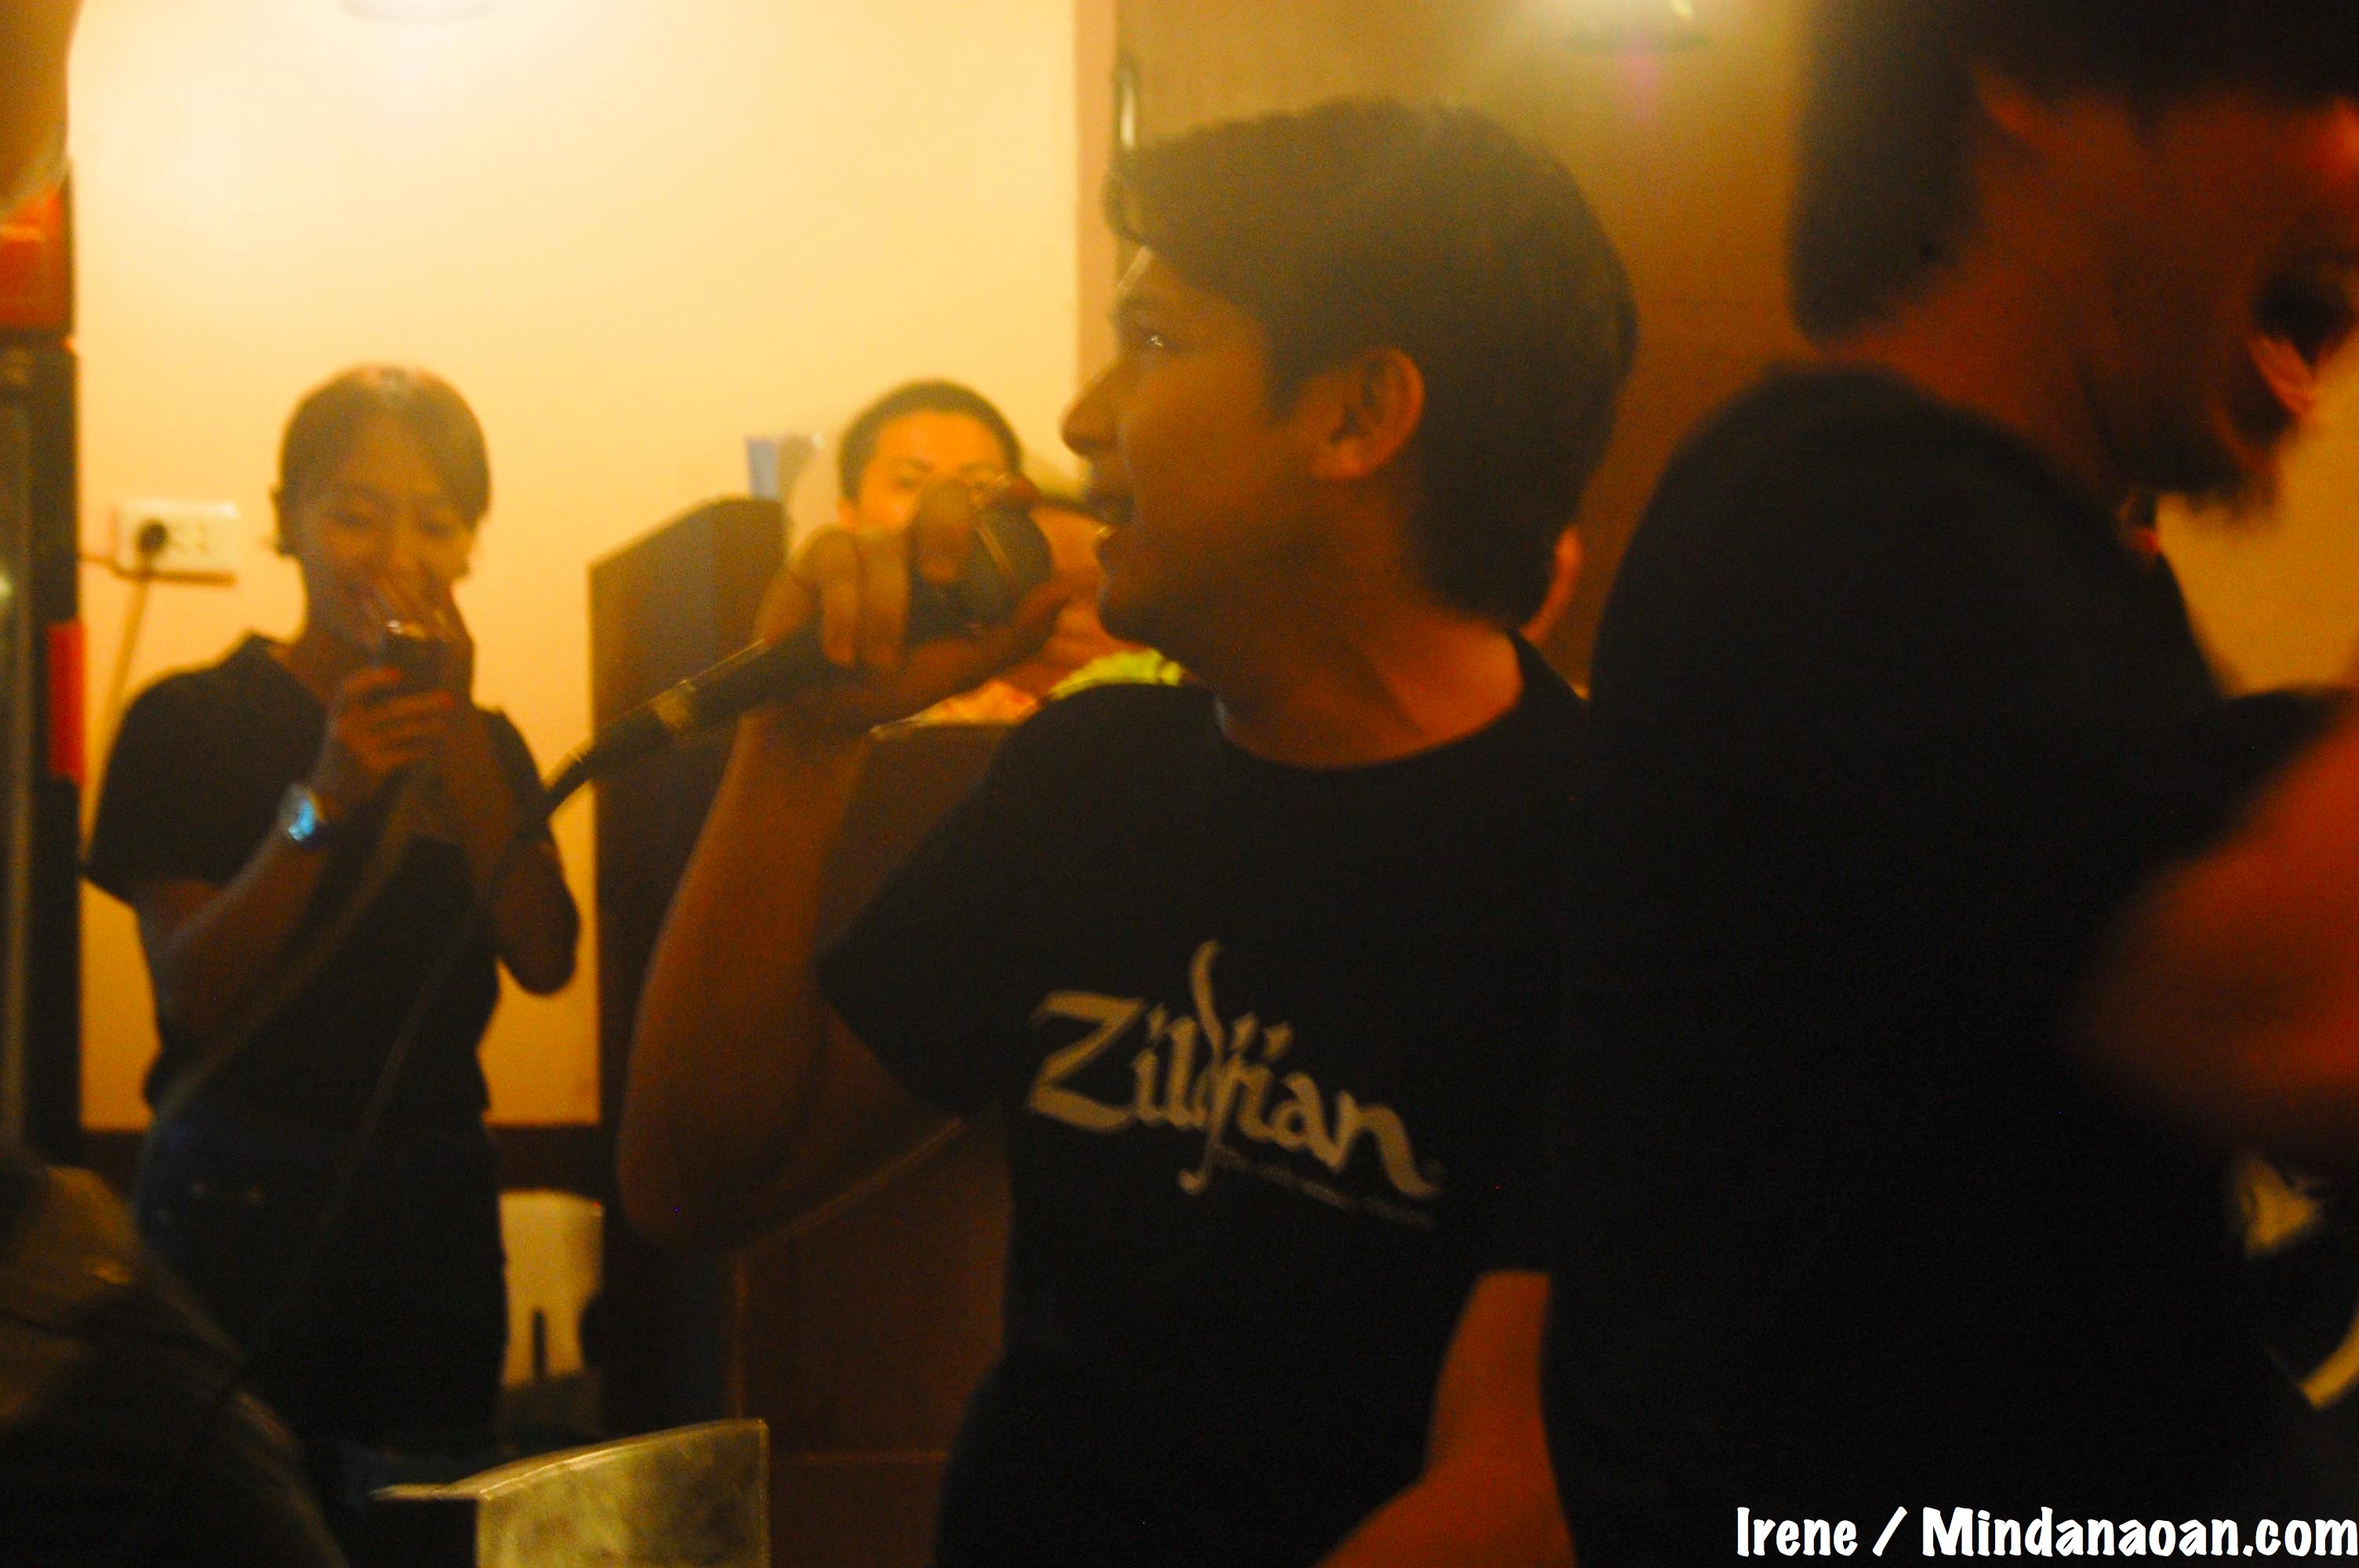 Fun after-party with Rivermaya band